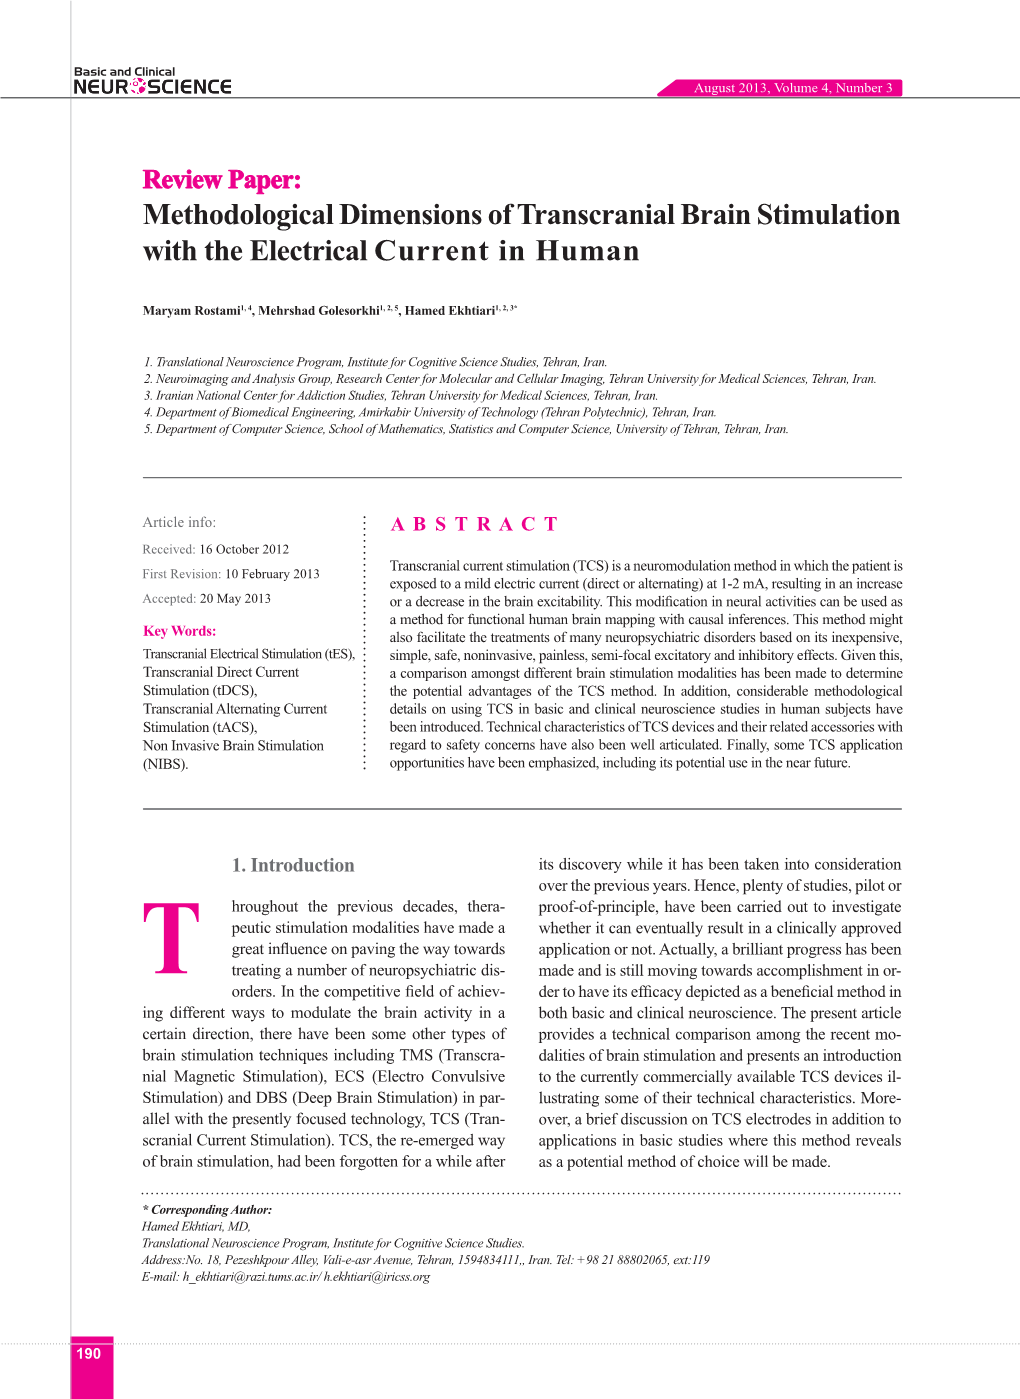 Methodological Dimensions of Transcranial Brain Stimulation with the Electrical Current in Human